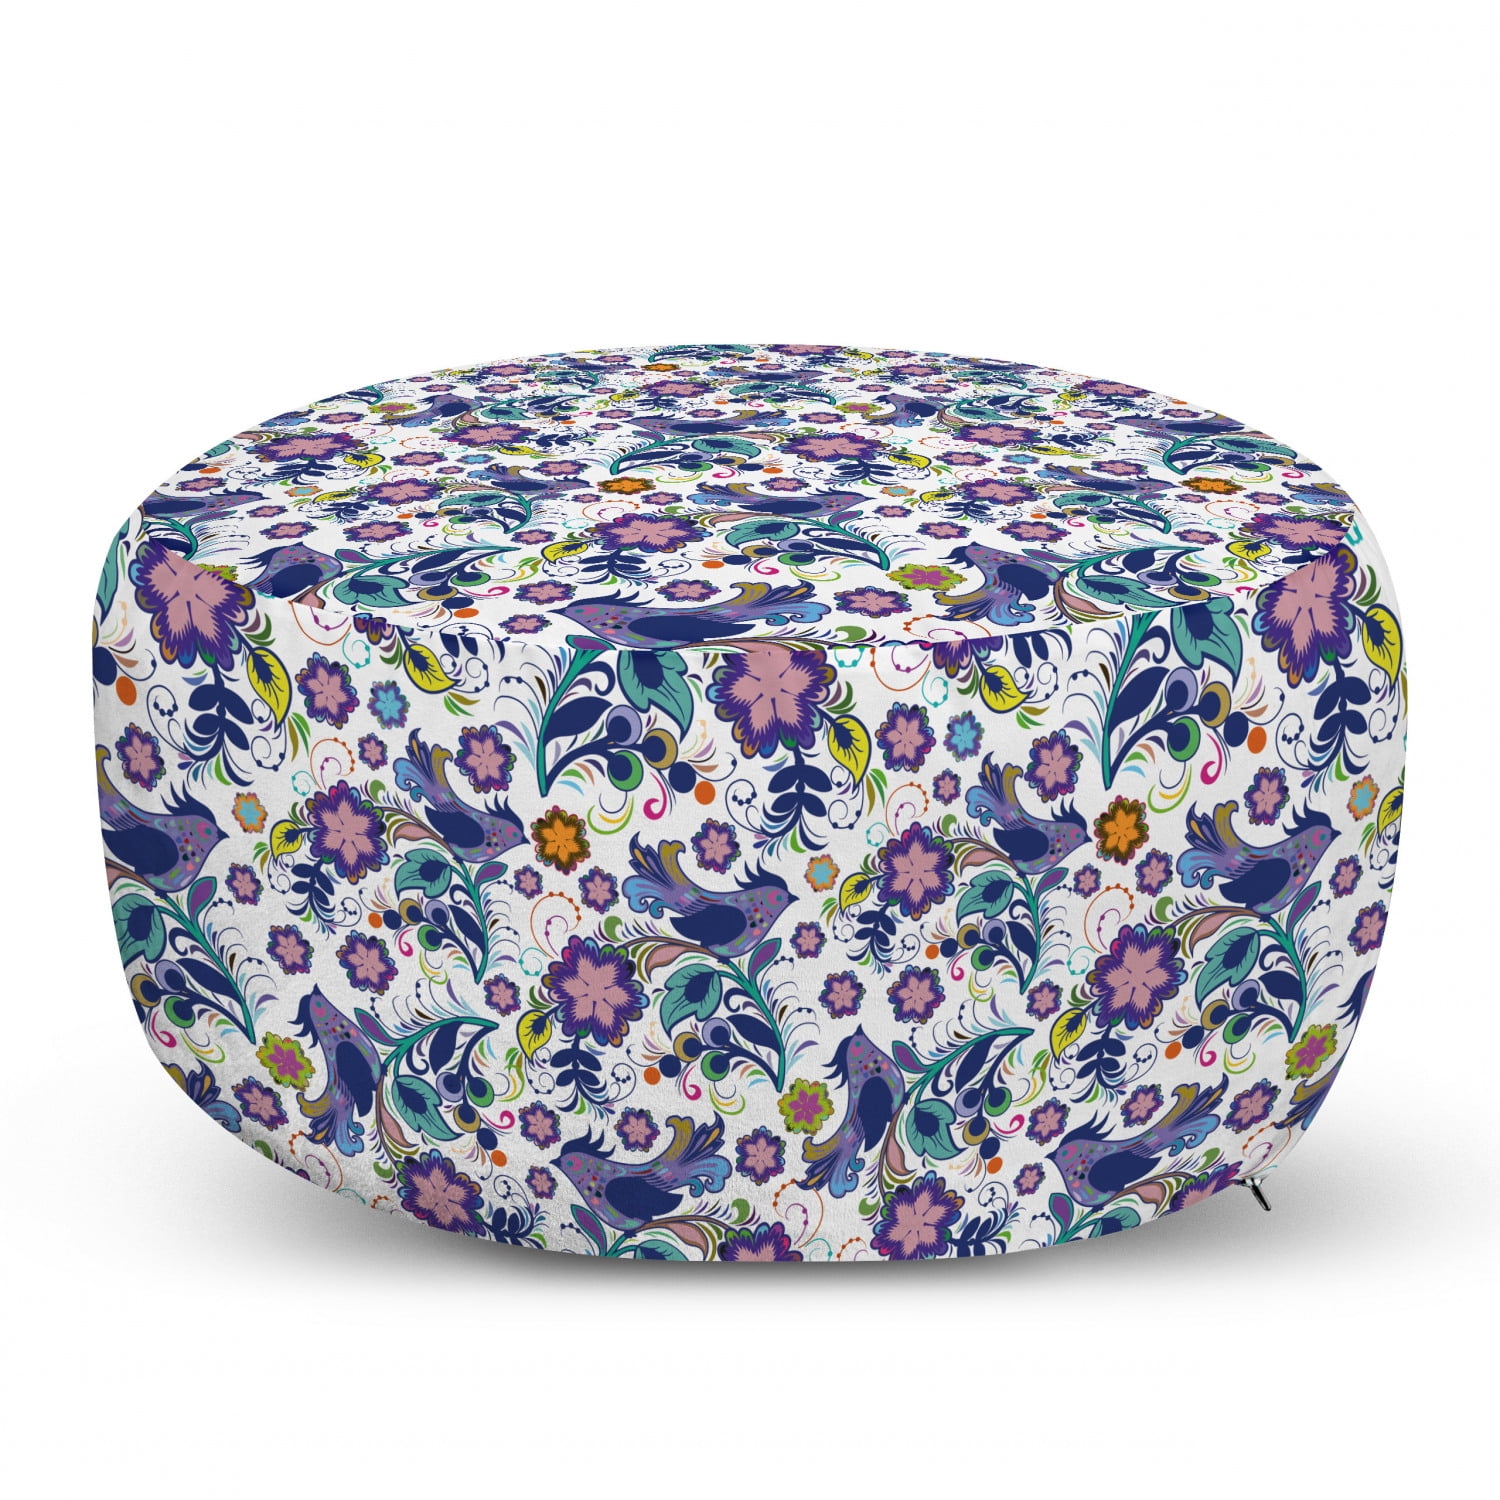 Abstract Floral Background Flourishing Nature Romantic Botanical Arrangement Indigo White Under Desk Foot Stool for Living Room Office Ottoman with Cover 25 Ambesonne Dandelion Rectangle Pouf